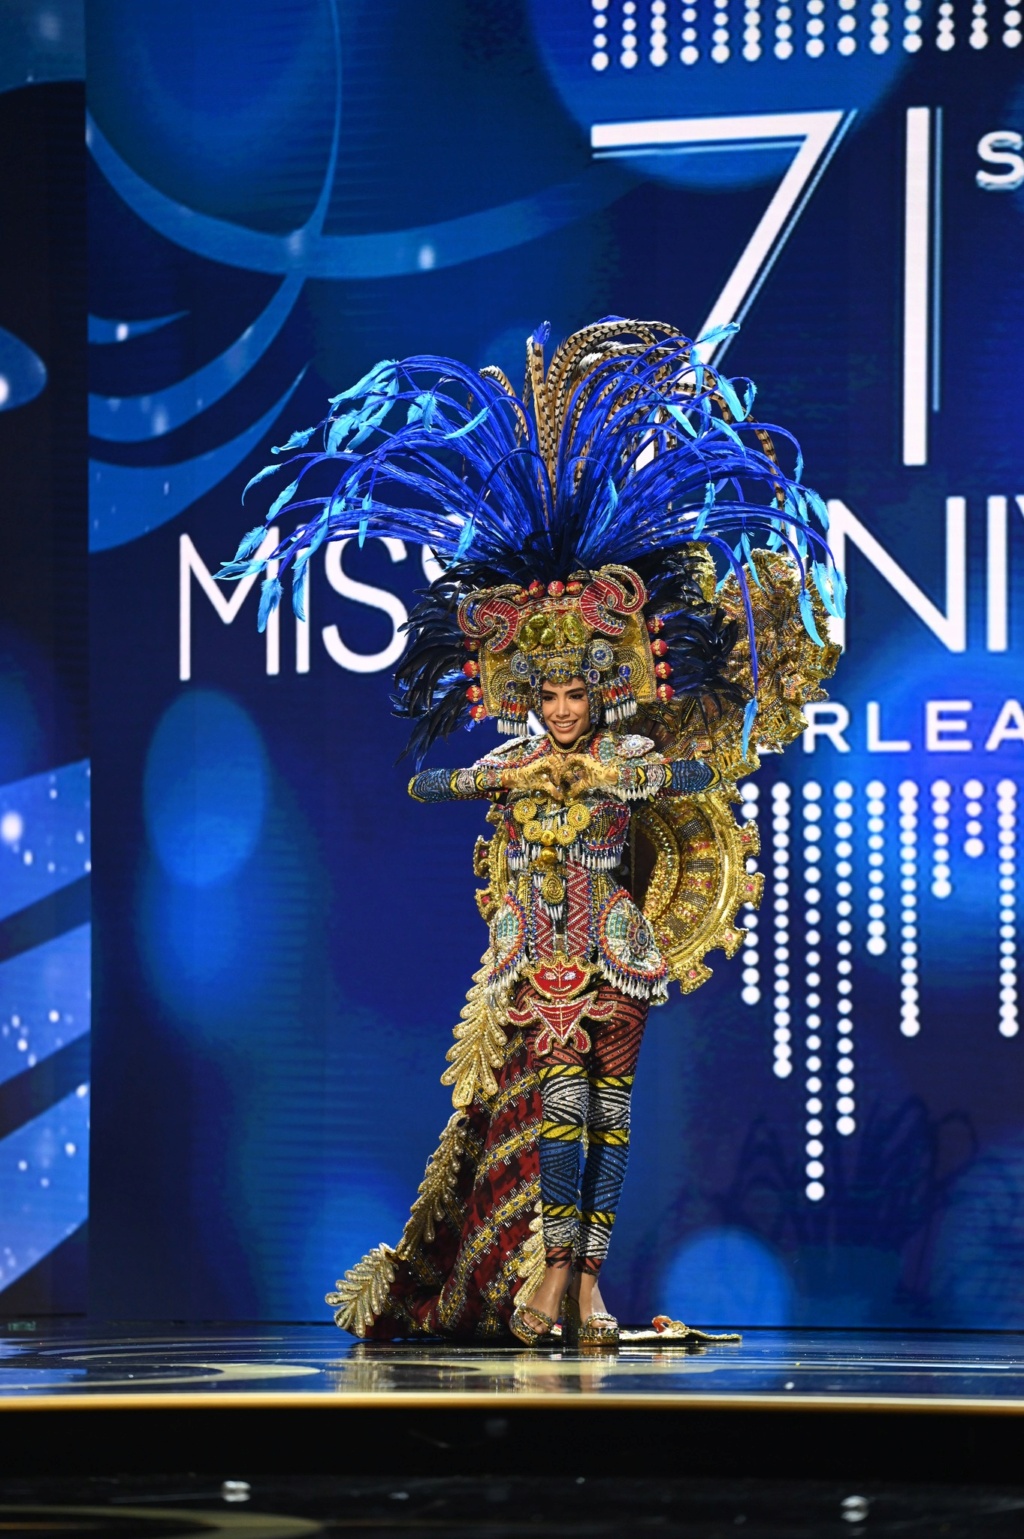  ♔ MISS UNIVERSE 2022 - NATIONAL COSTUME  ♔ - Page 2 32548810